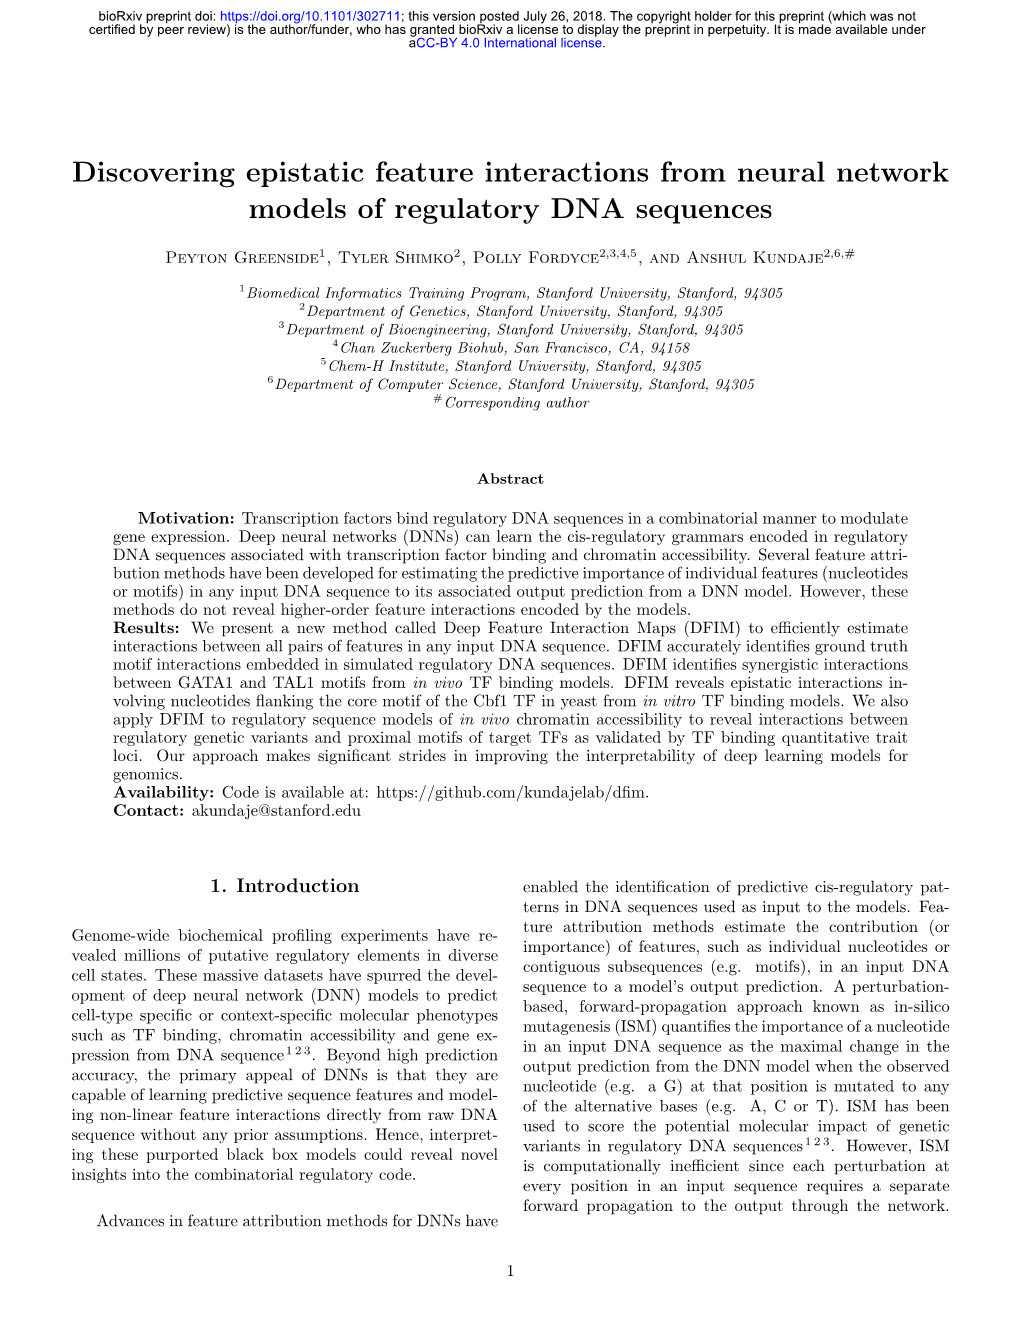 Discovering Epistatic Feature Interactions from Neural Network Models of Regulatory DNA Sequences